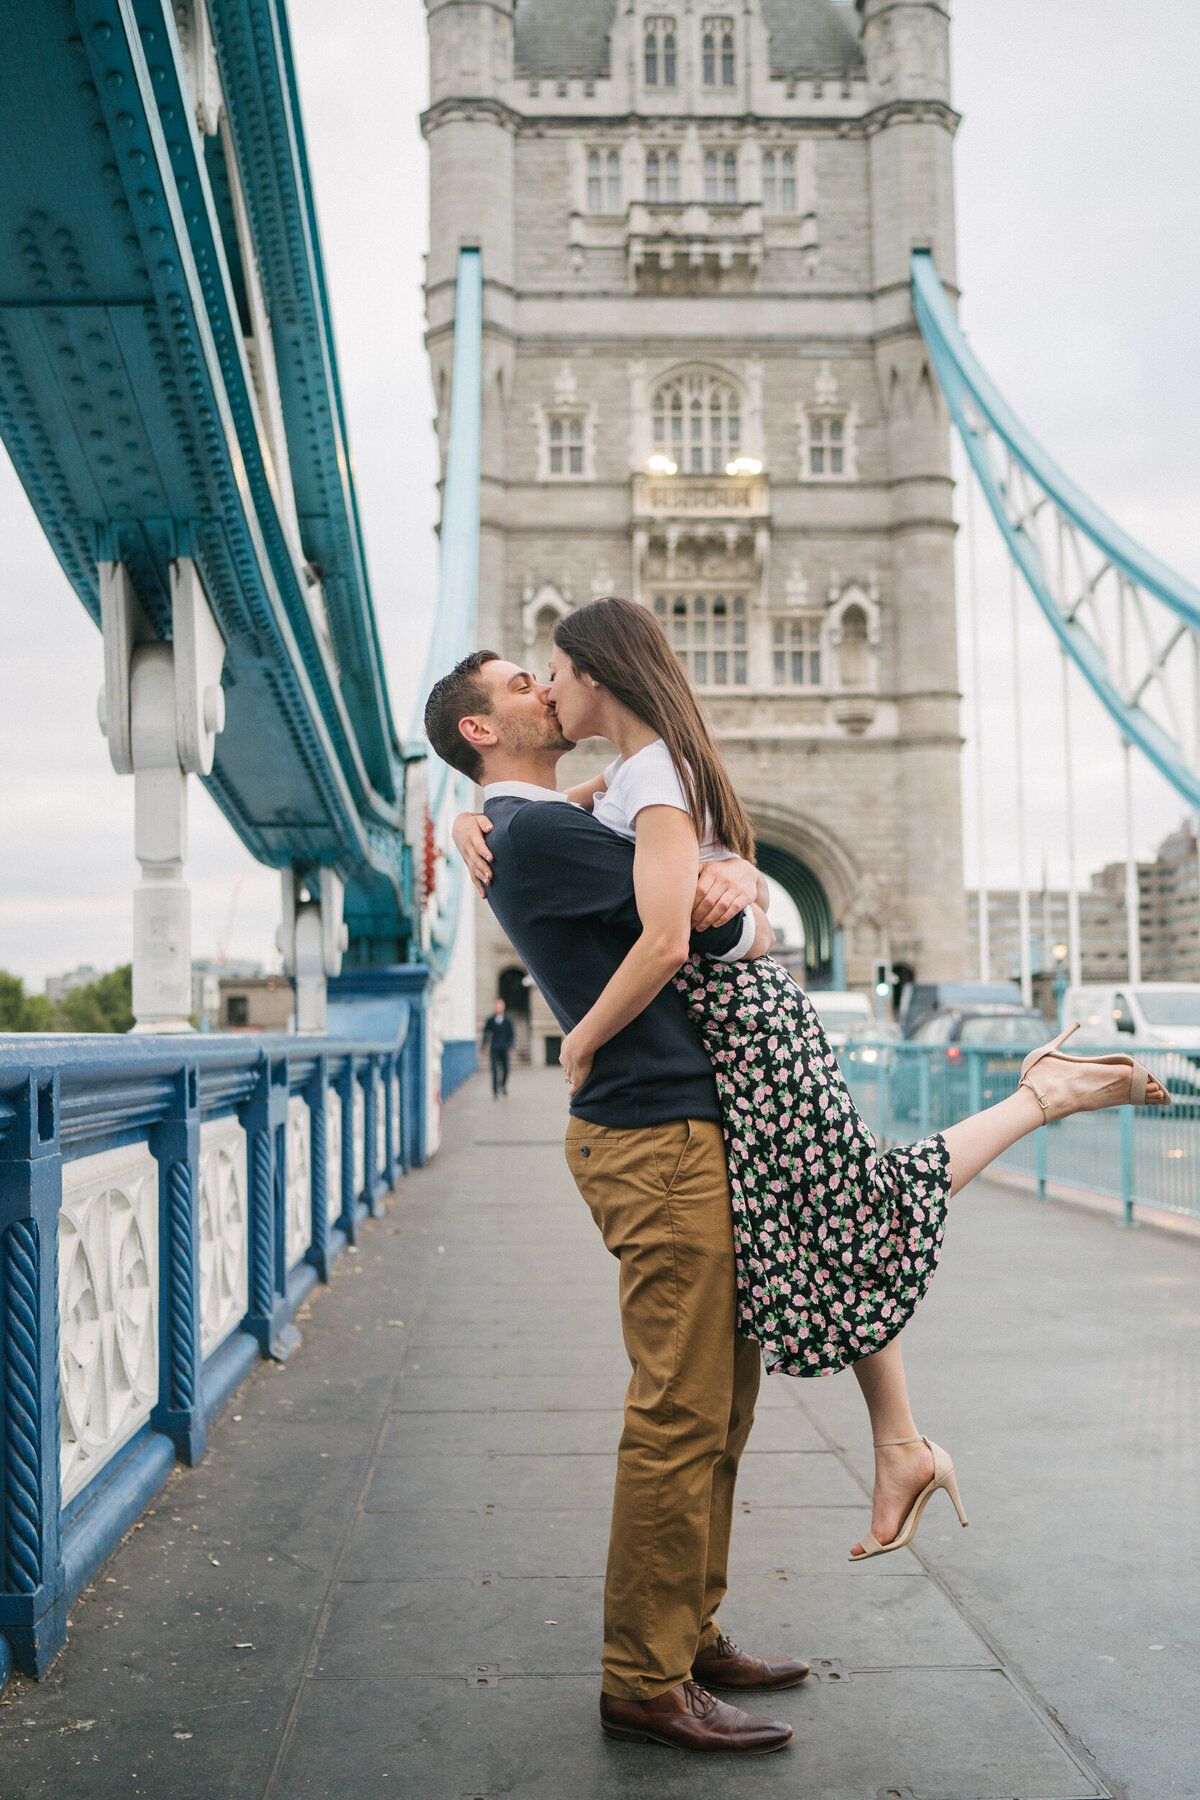 relaxed and natural london wedding photographer-12